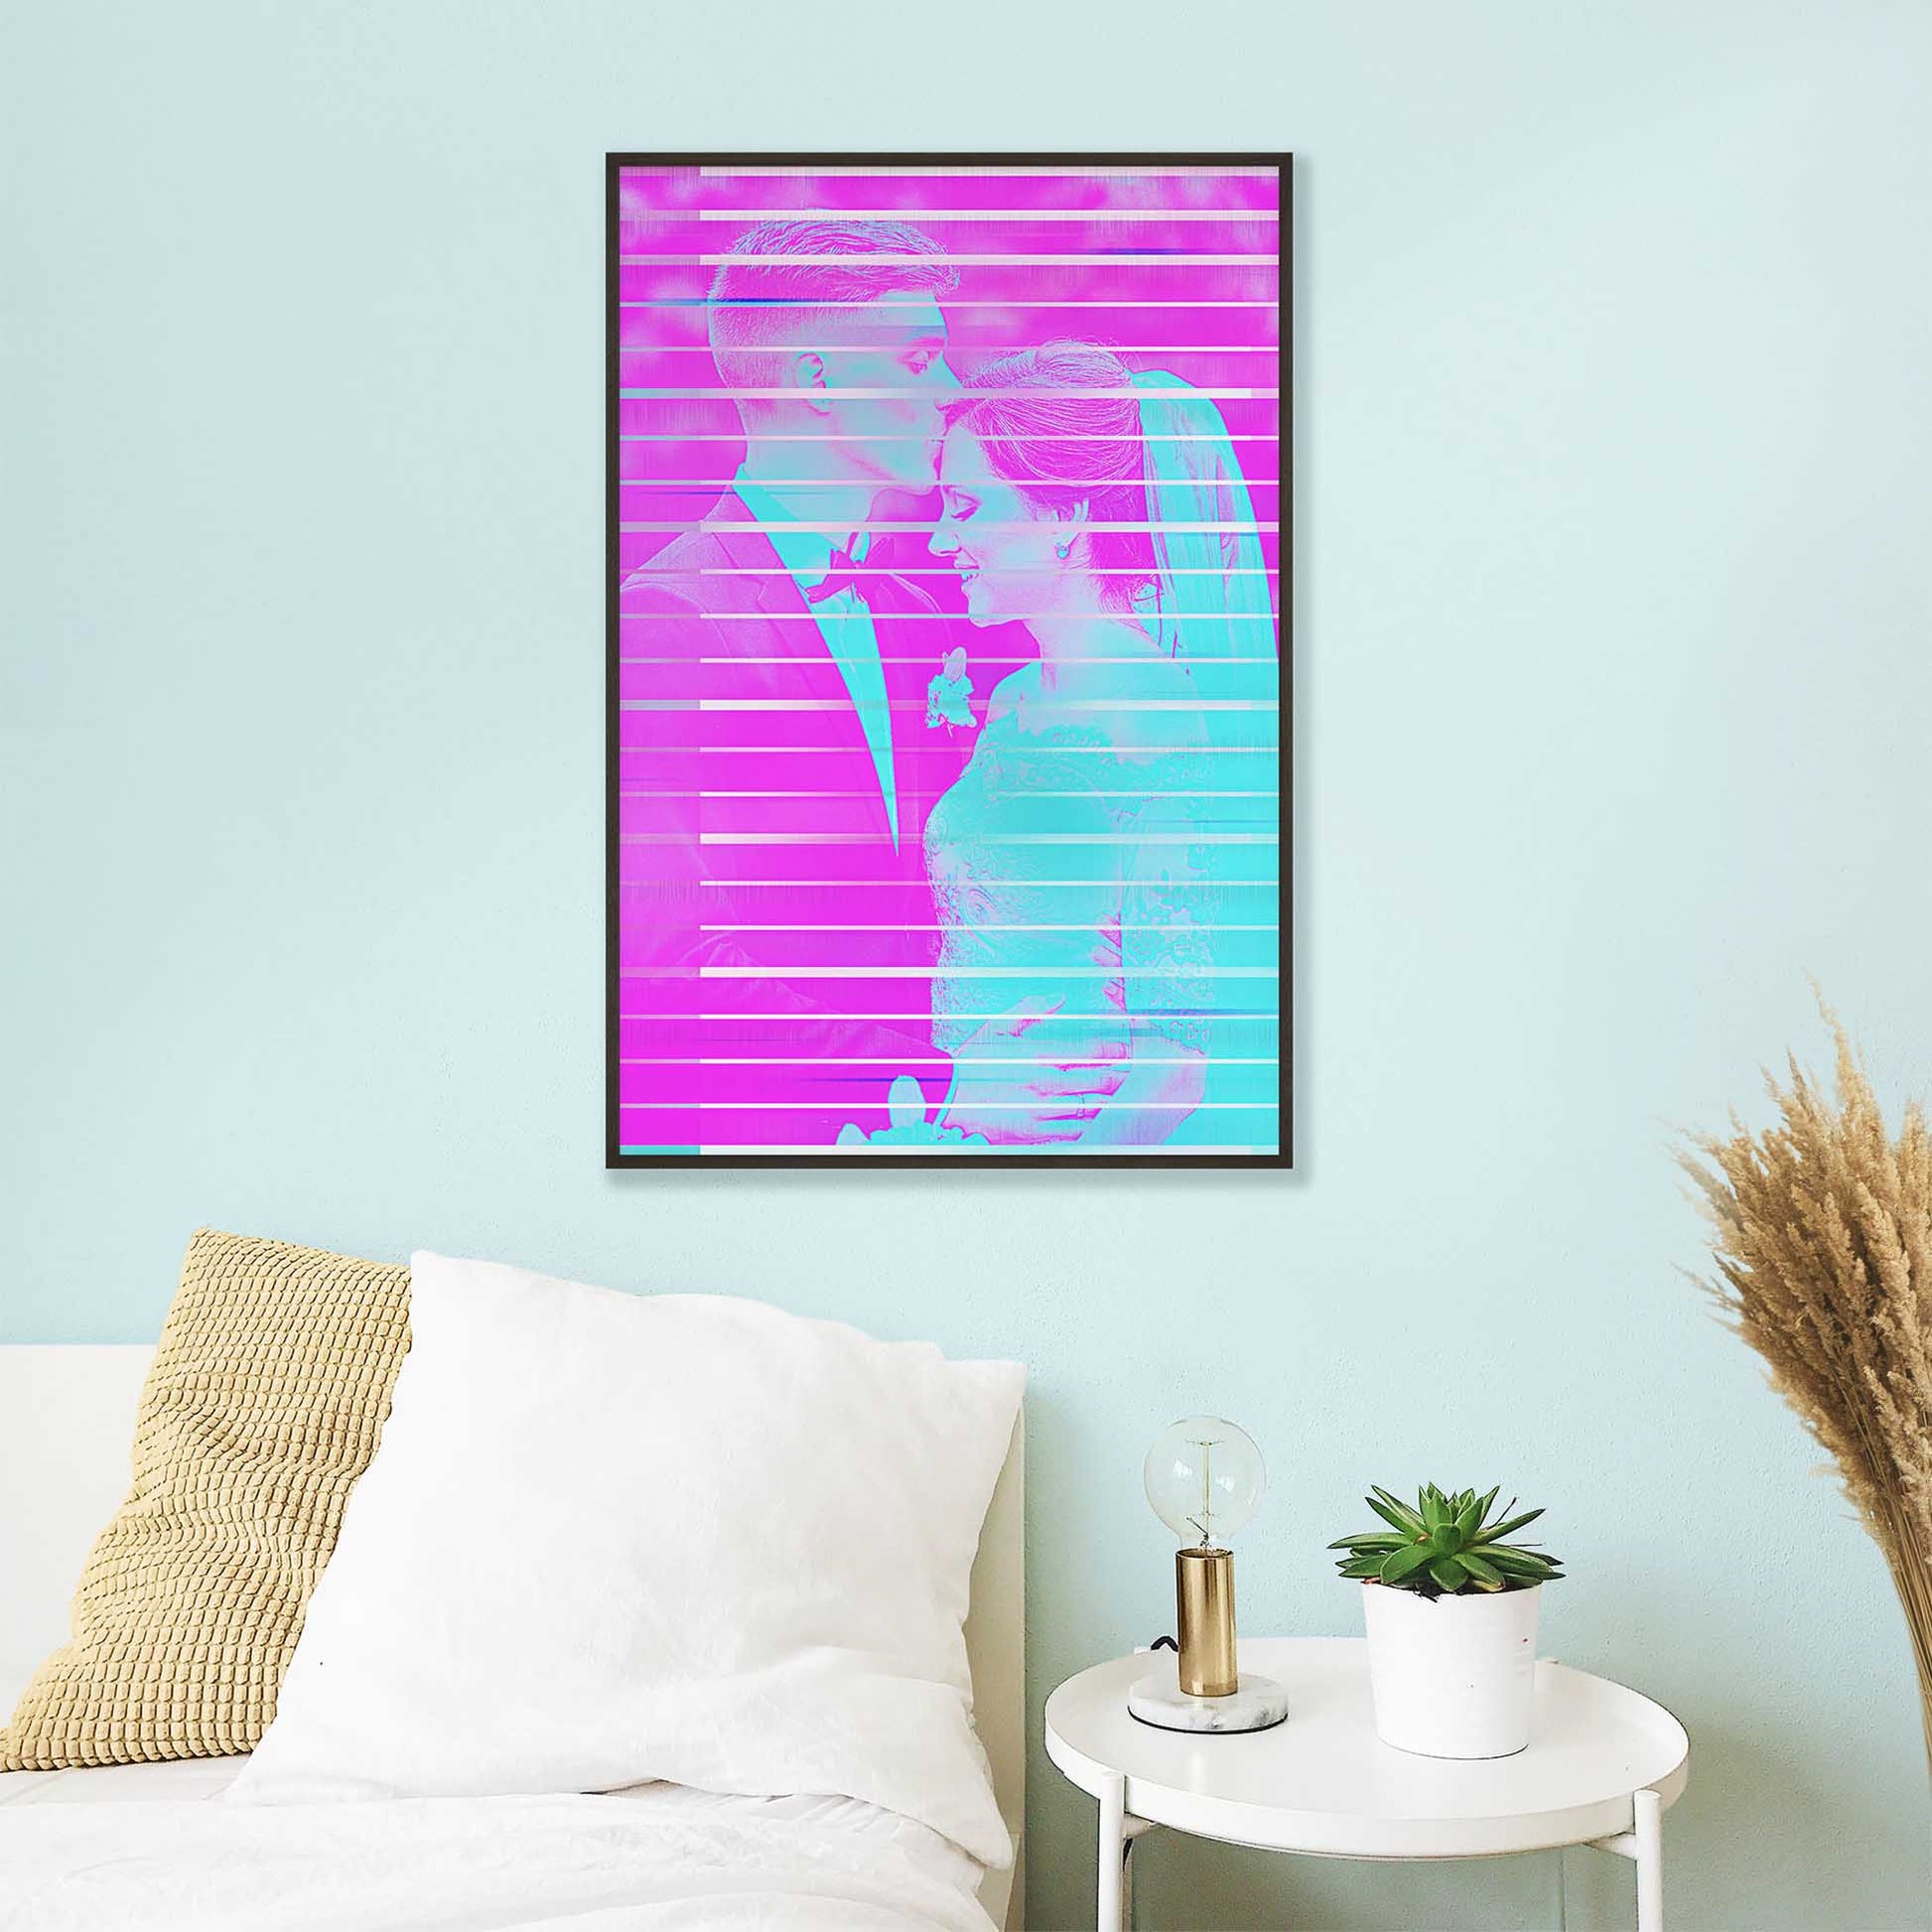 Bring a pop of color and beauty to your walls with our Personalised Purple & Blue Framed Print. The vibrant and vivid colors create a captivating image that is both unique and stunning. Crafted with gallery-quality and a wooden frame